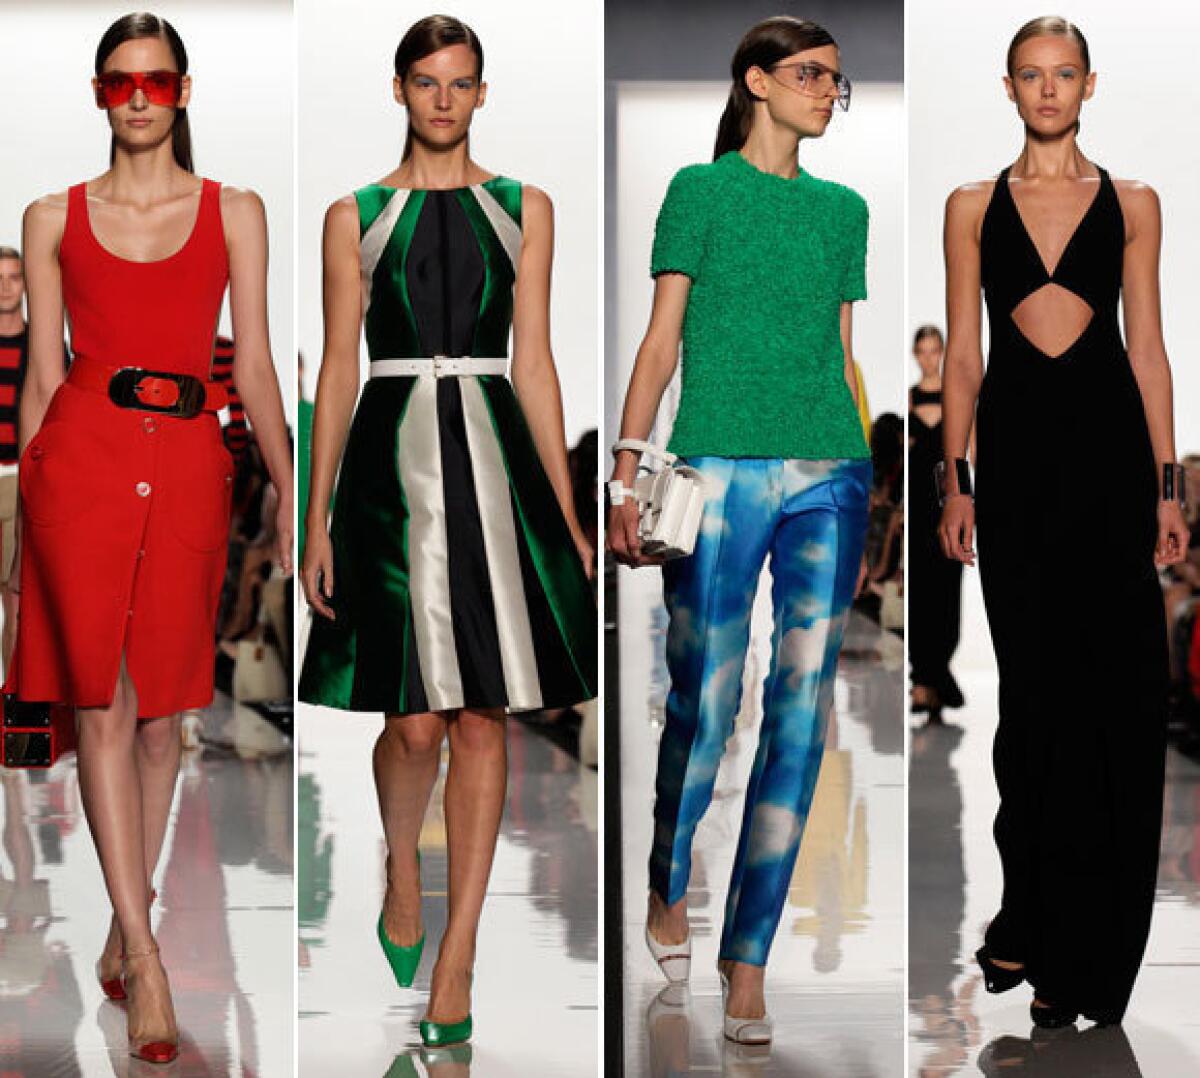 Looks from the Michael Kors spring-summer 2013 collection shown during New York Fashion Week.